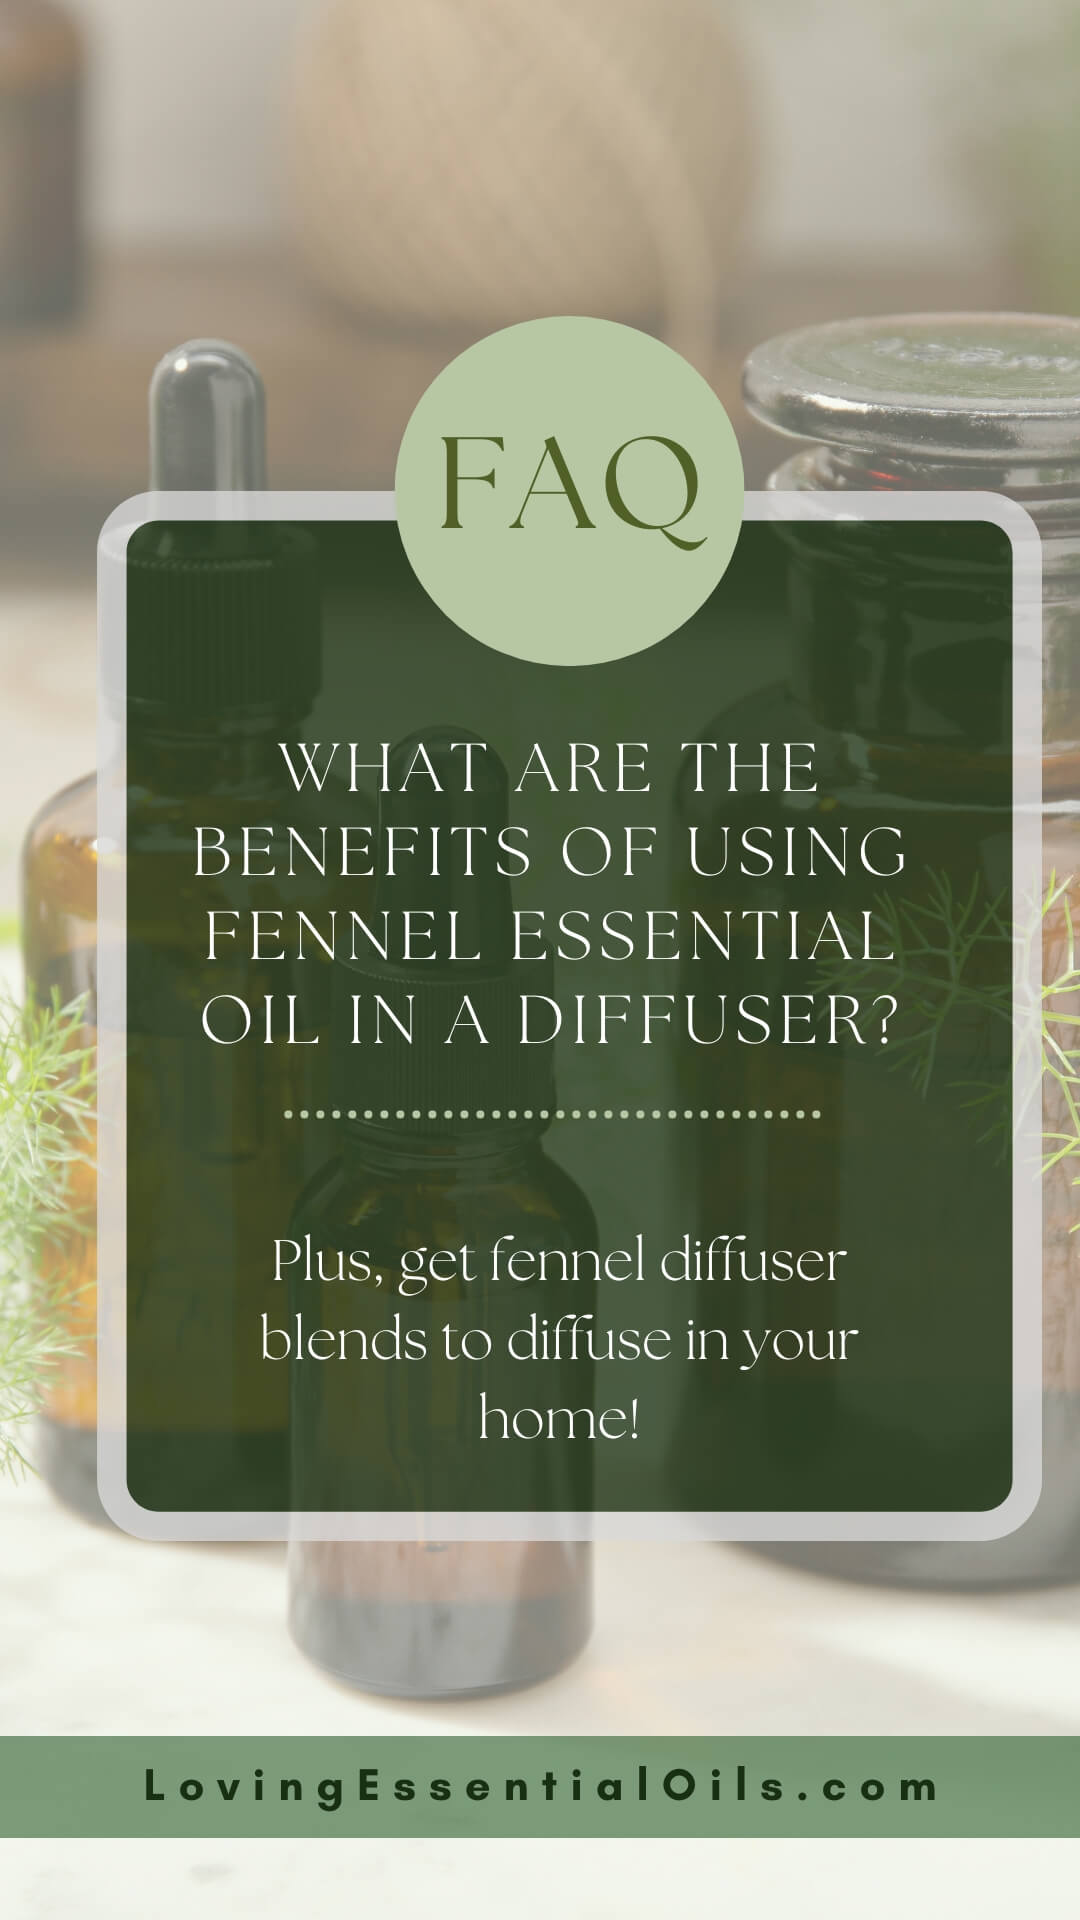 Fennel Essential oil in a Diffuser by Loving Essential Oils